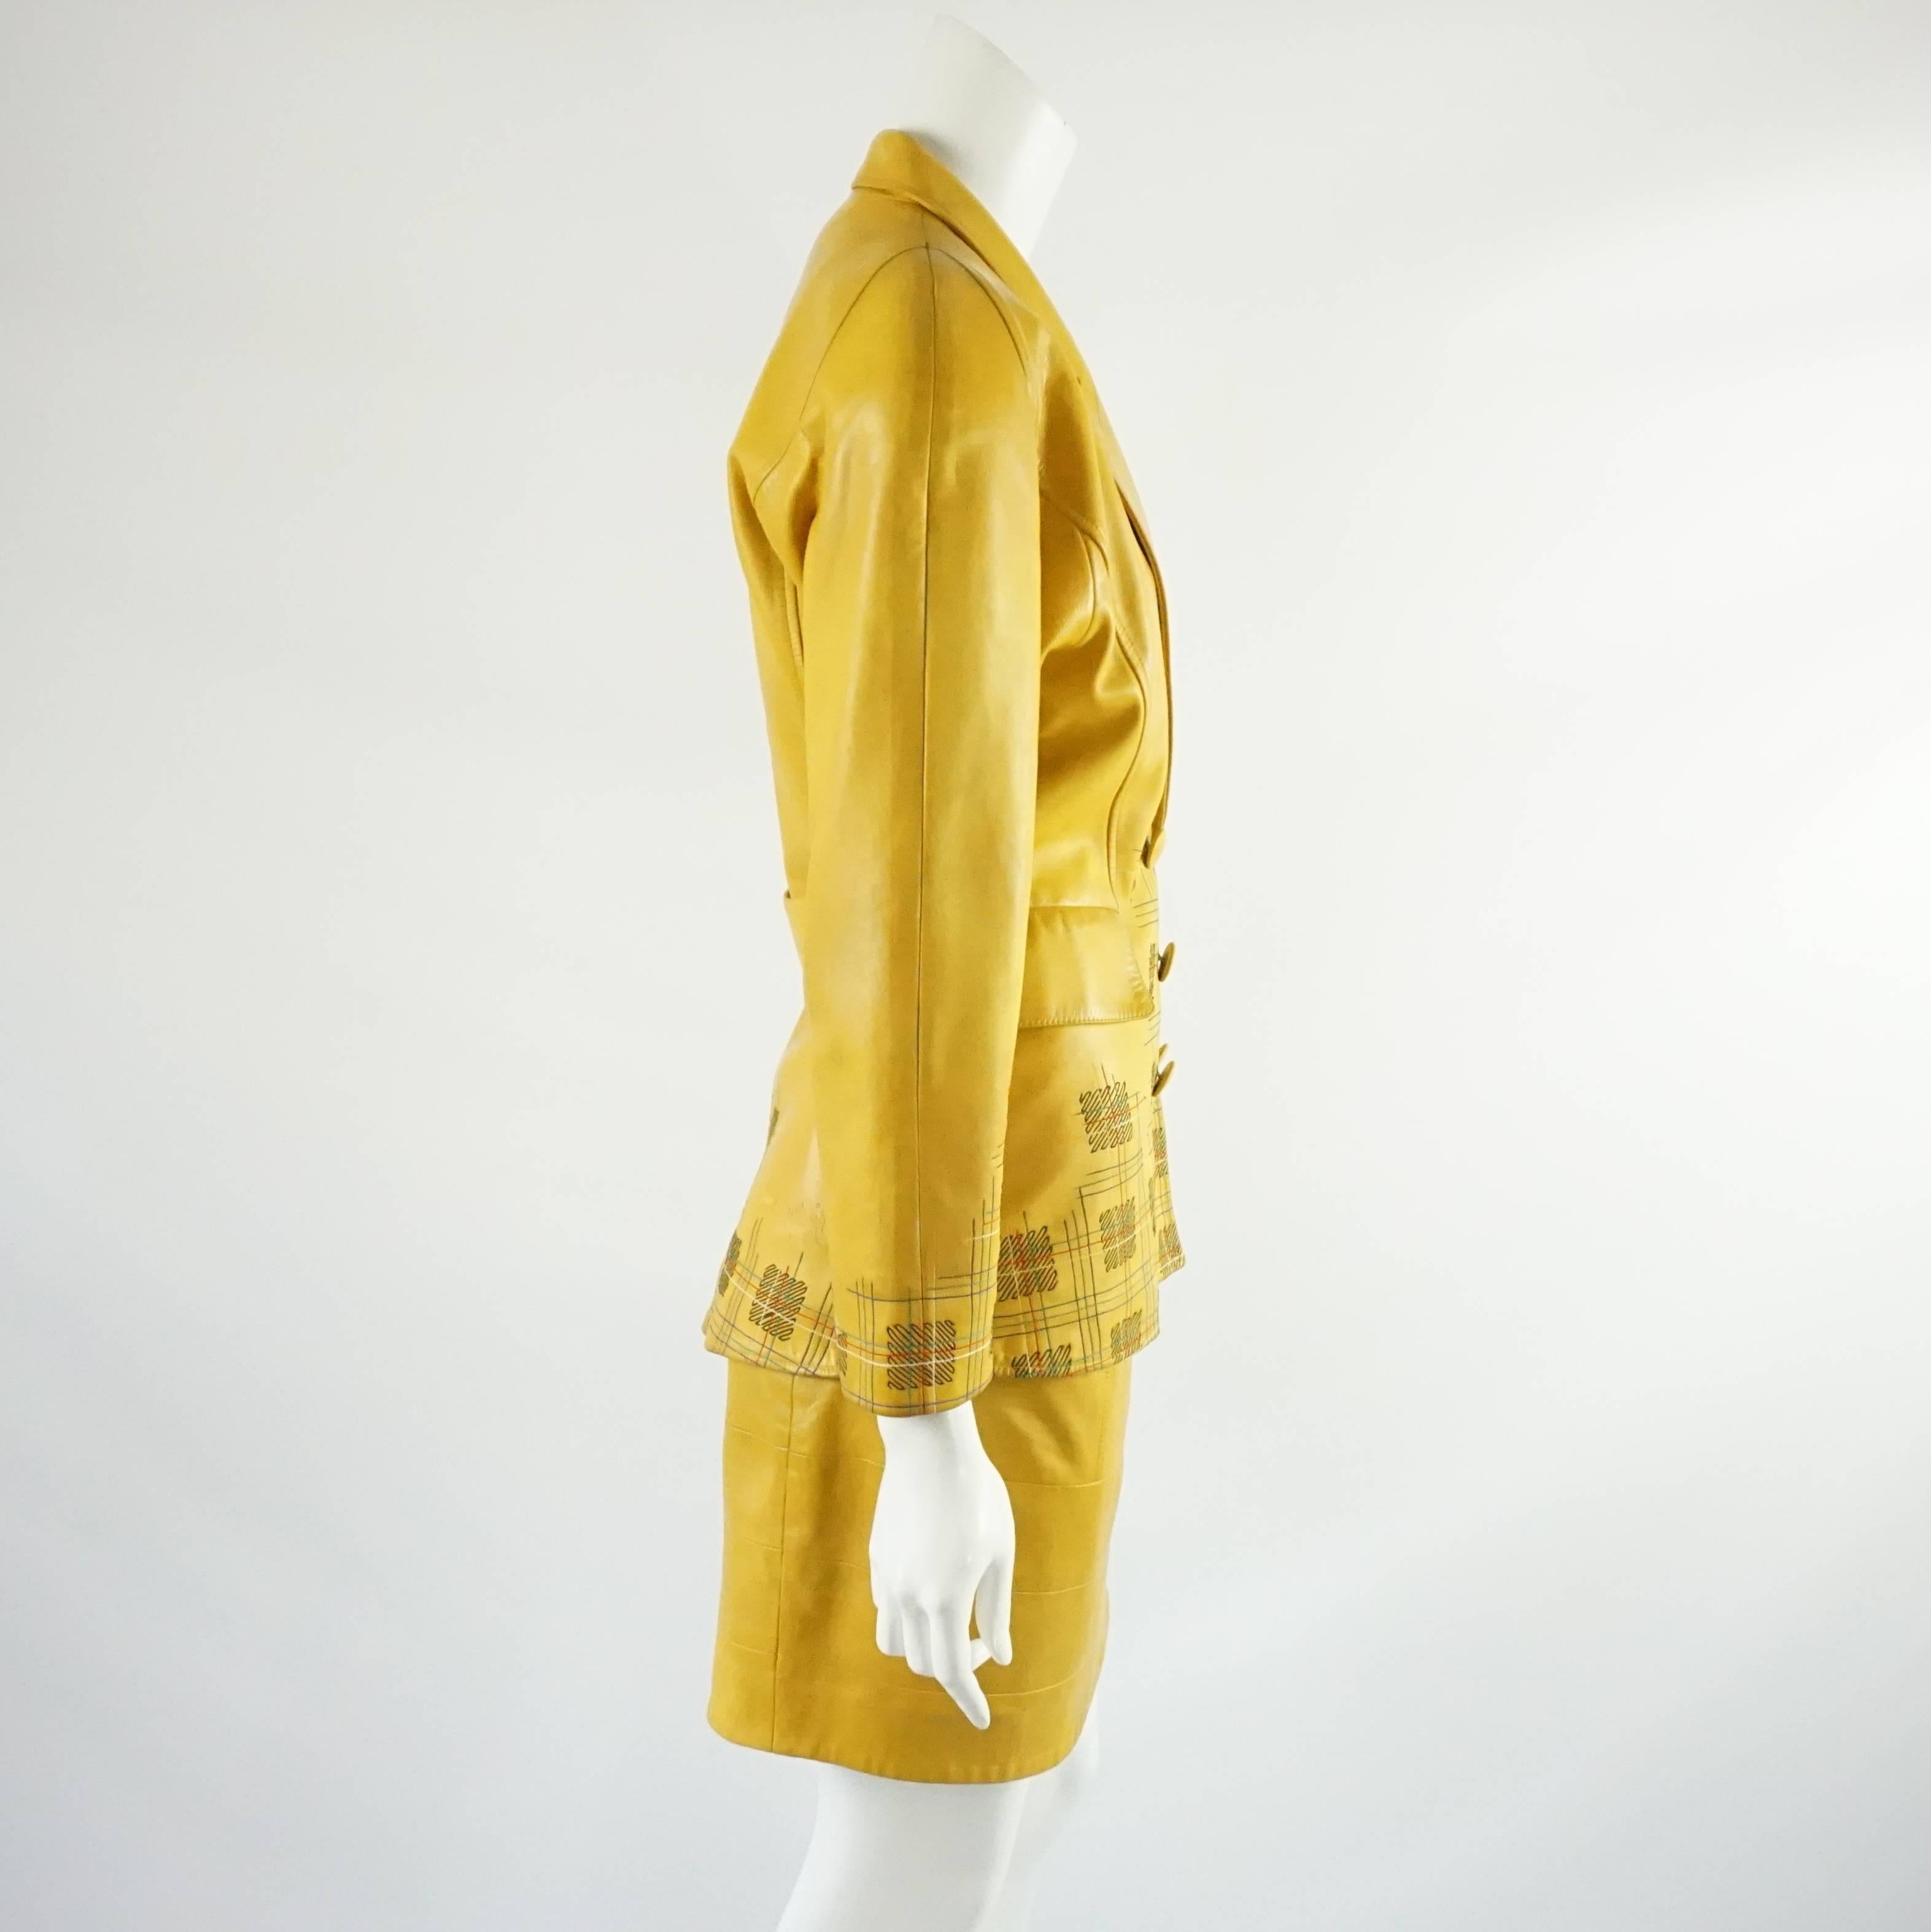 This vintage Jean Claude Jitrois yellow leather skirt suit has 6 buttons on the front of the jacket, 2 pockets, rounded shoulders, and 2 decorative buttons on the back. The jacket also has a design on the lower half that has black, red, green,